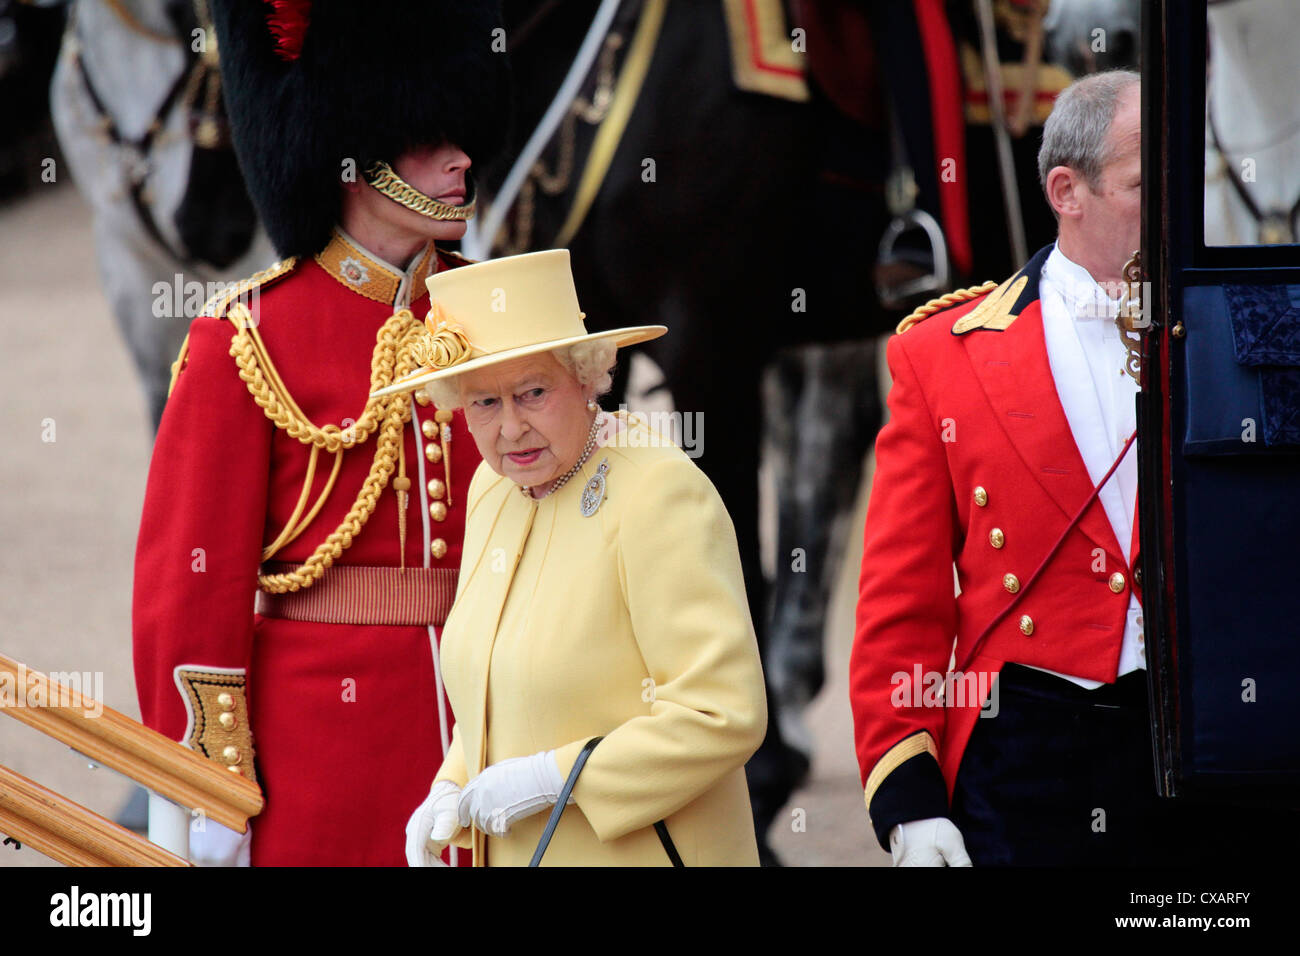 HM The Queen, Trooping the Colour 2012, The Queen's Birthday Parade, Whitehall, Horse Guards, London, England, United Kingdom Stock Photo